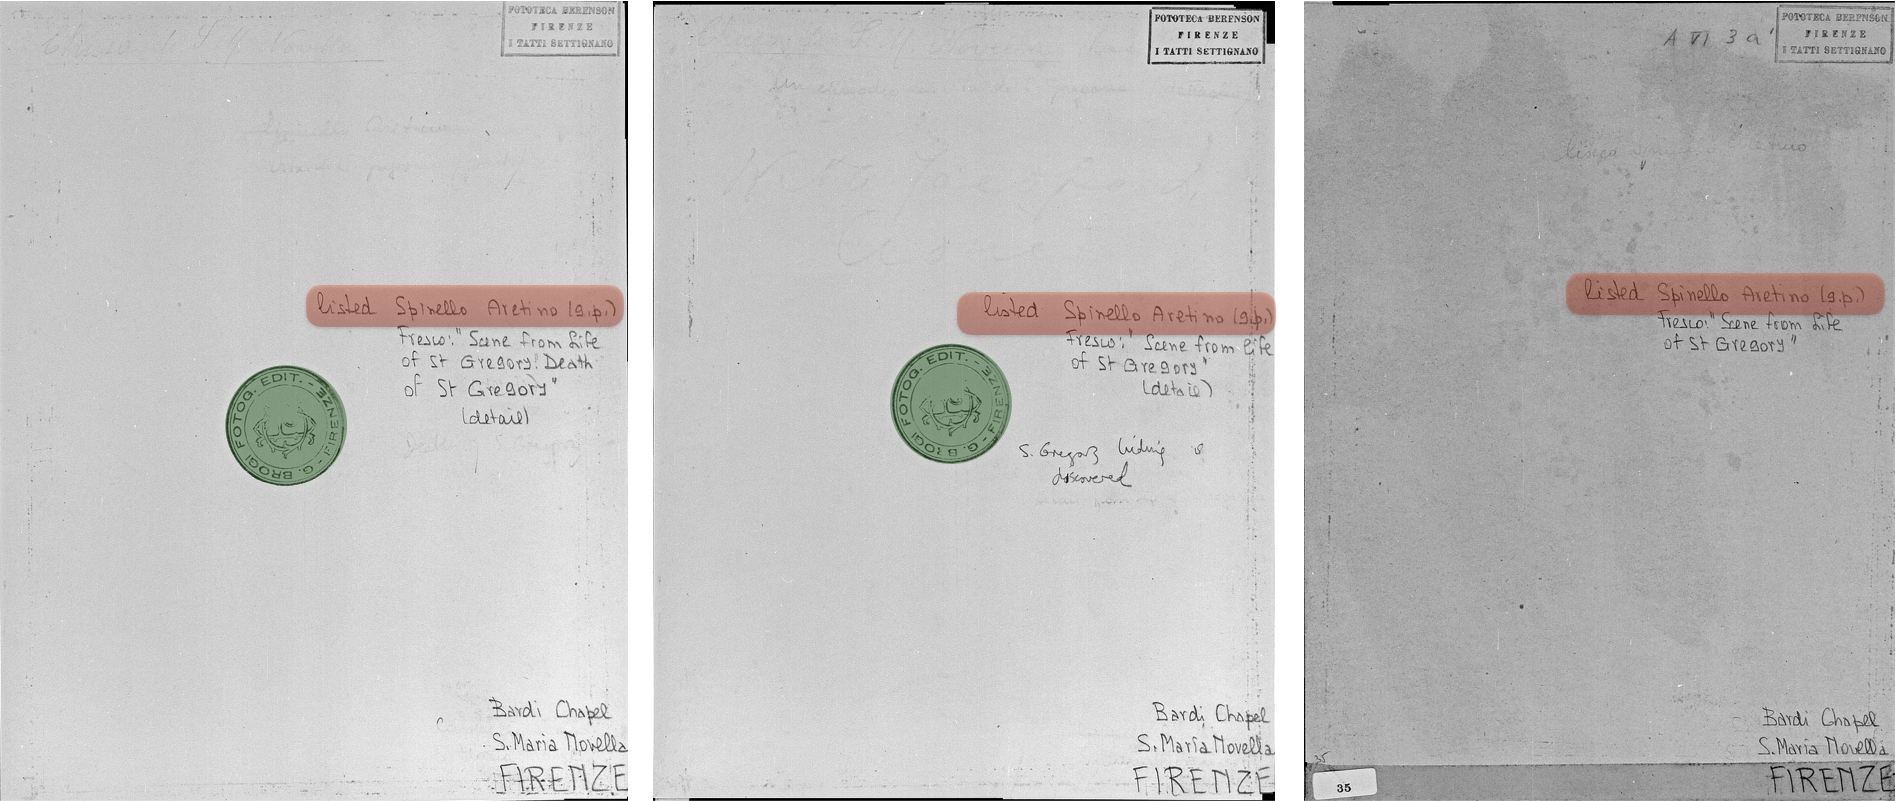 Matching stamps and handwritten text on the verso of photographs.